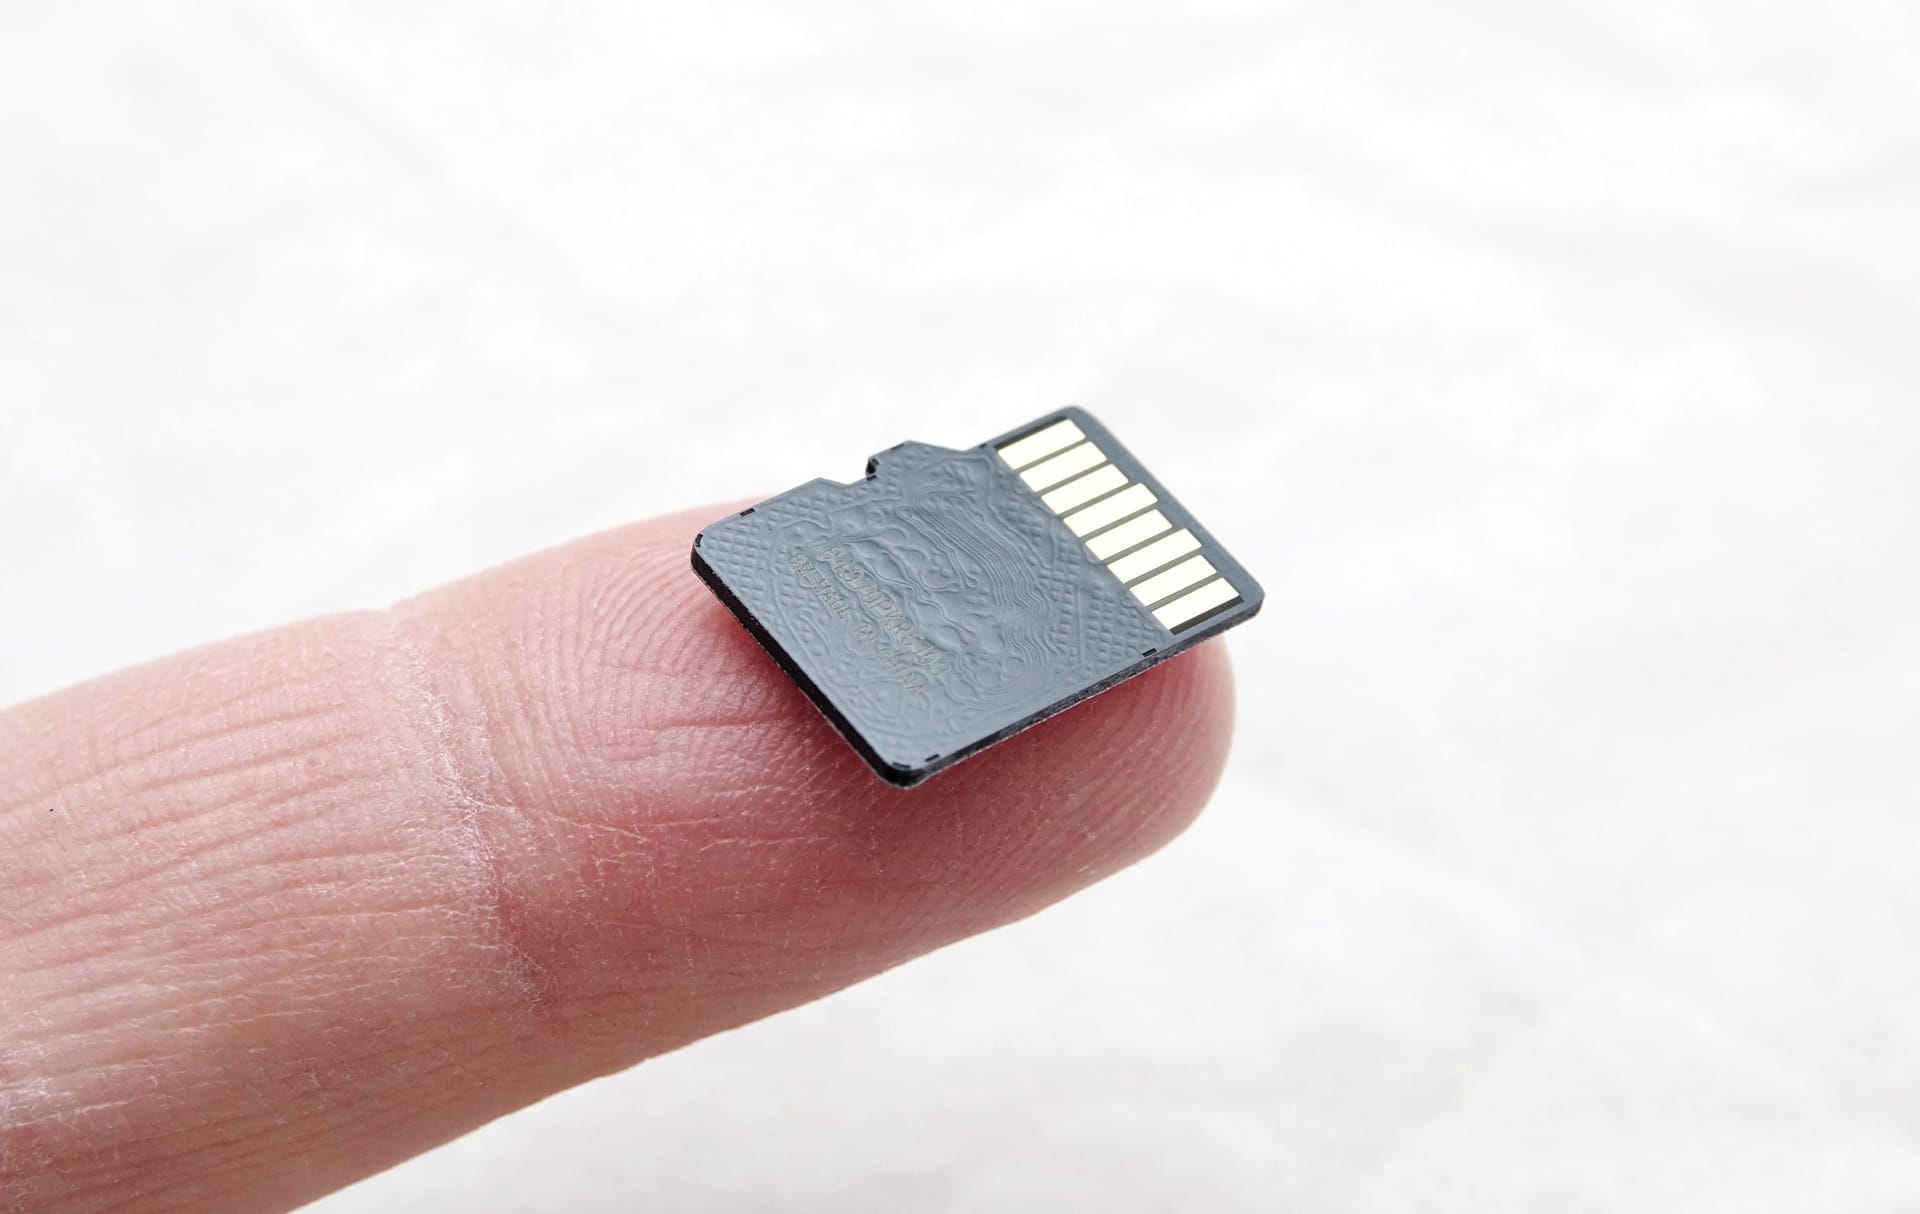 A tiny microSD card on the tip of a finger